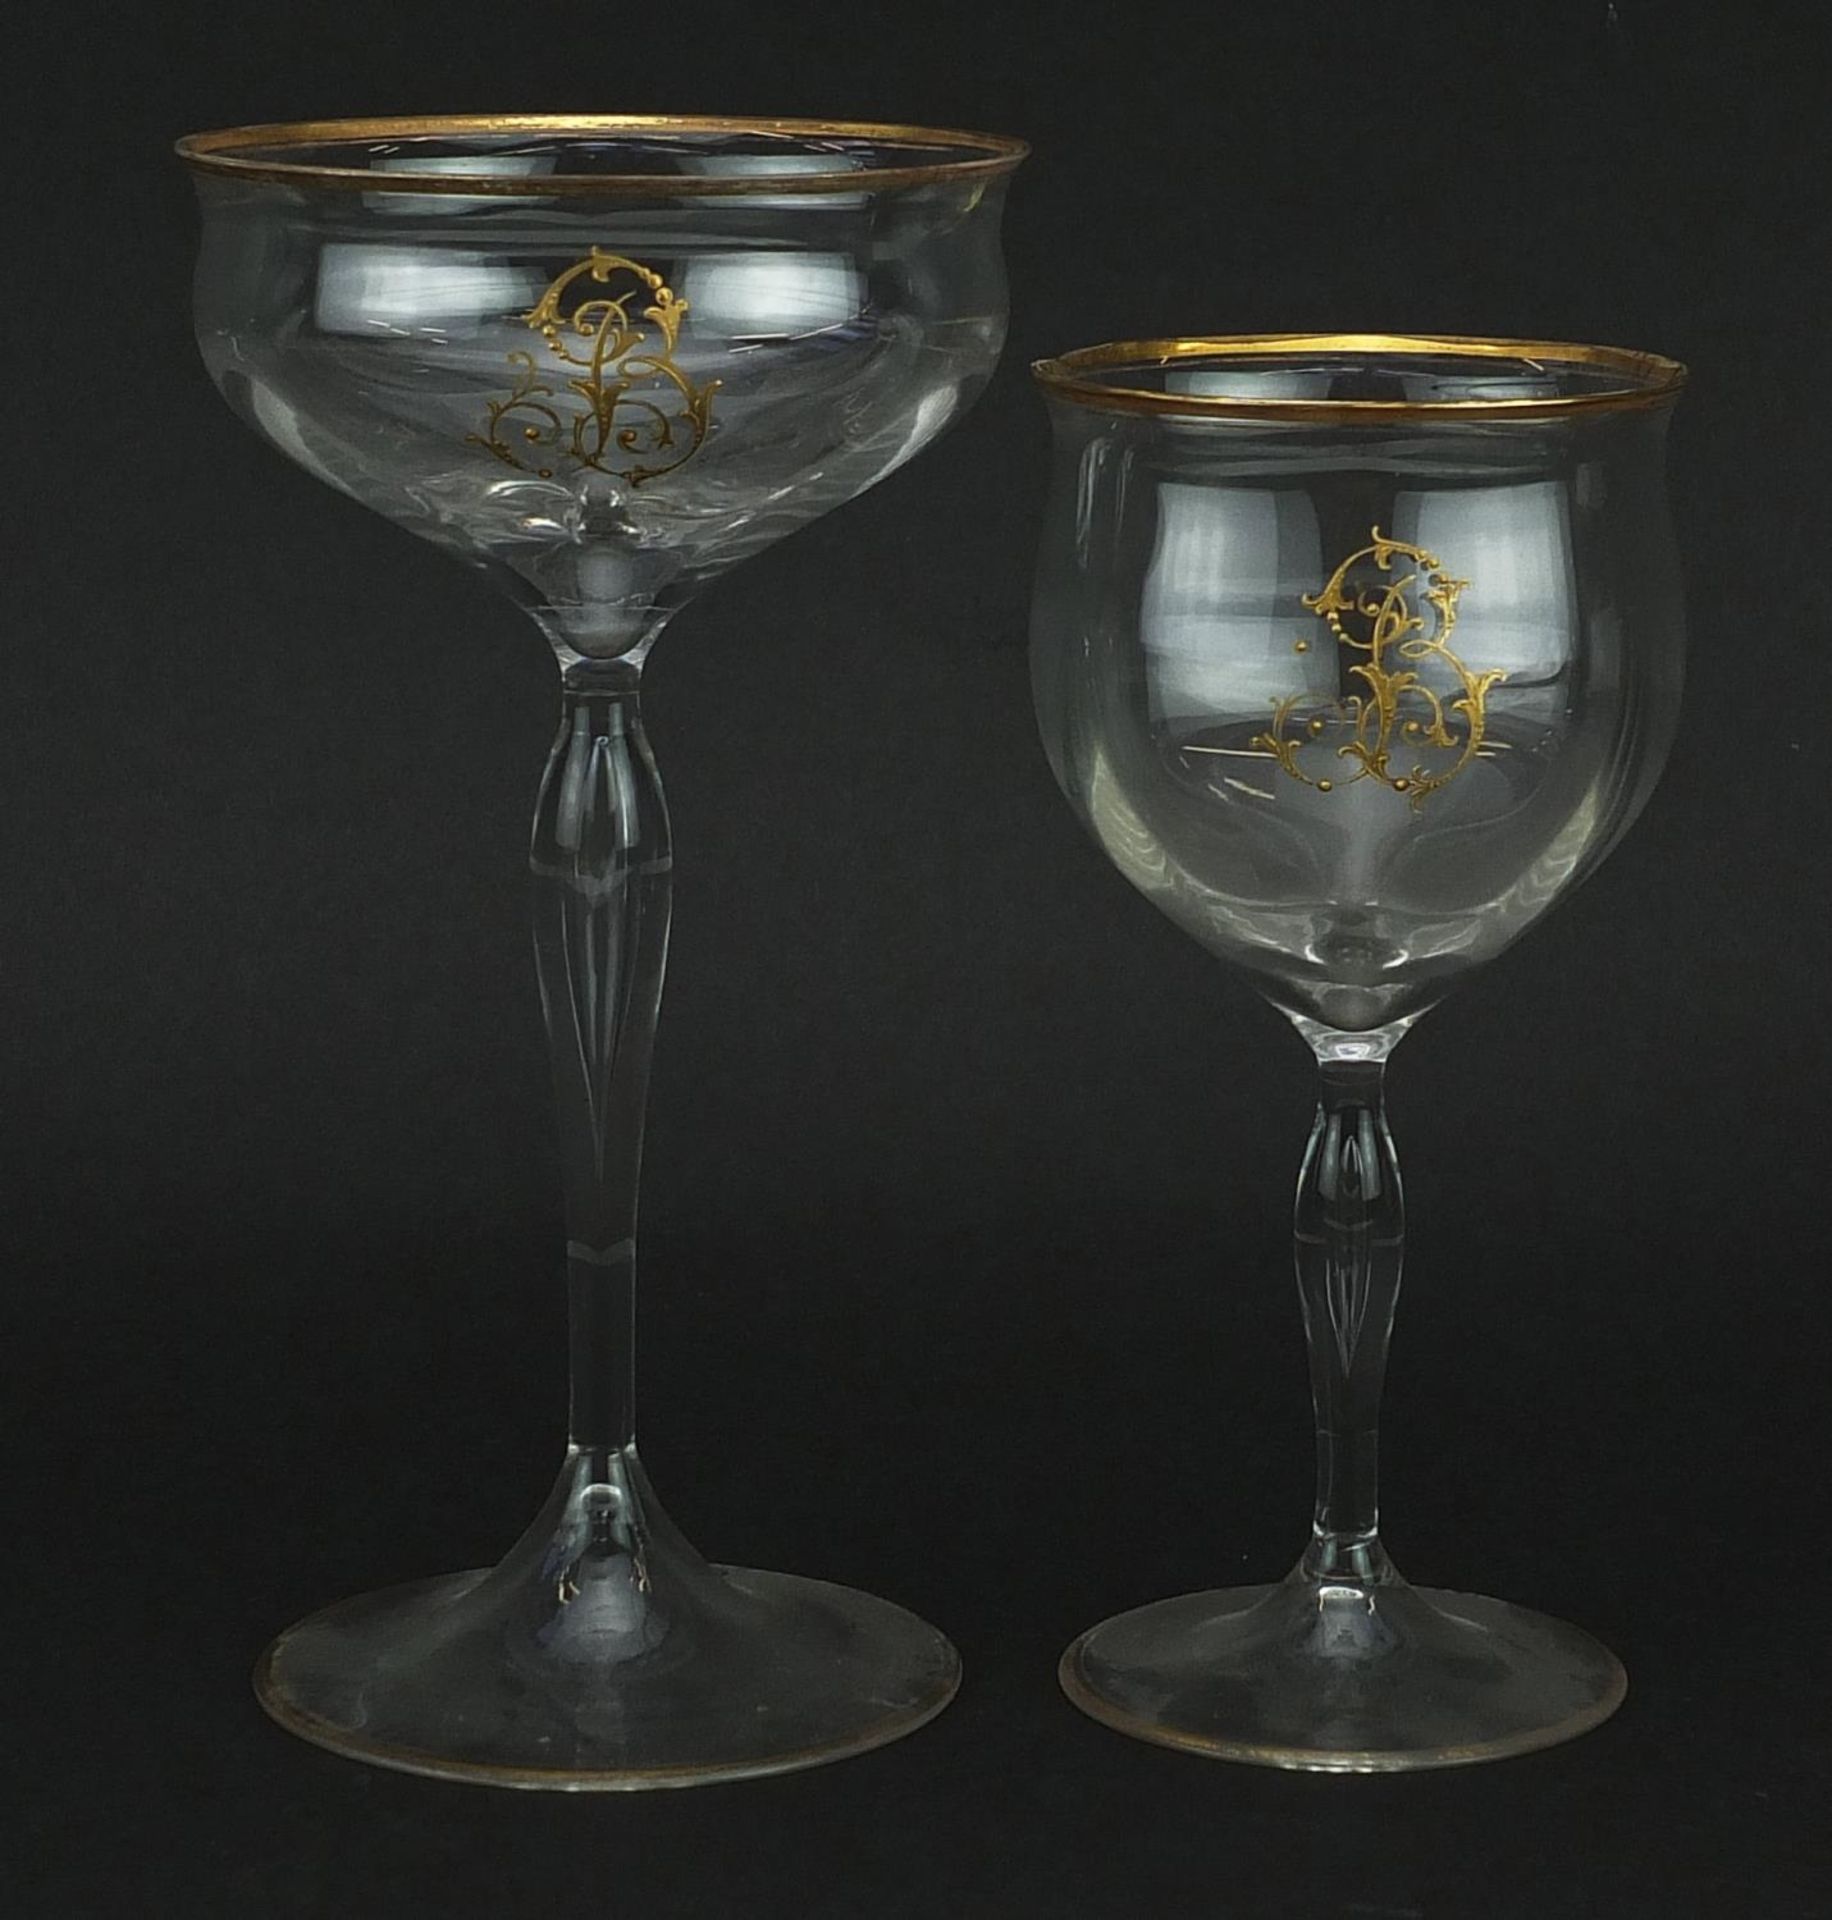 Two sets of six Venetian glasses with gilt monograms and borders, the largest each 18cm high - Image 4 of 4